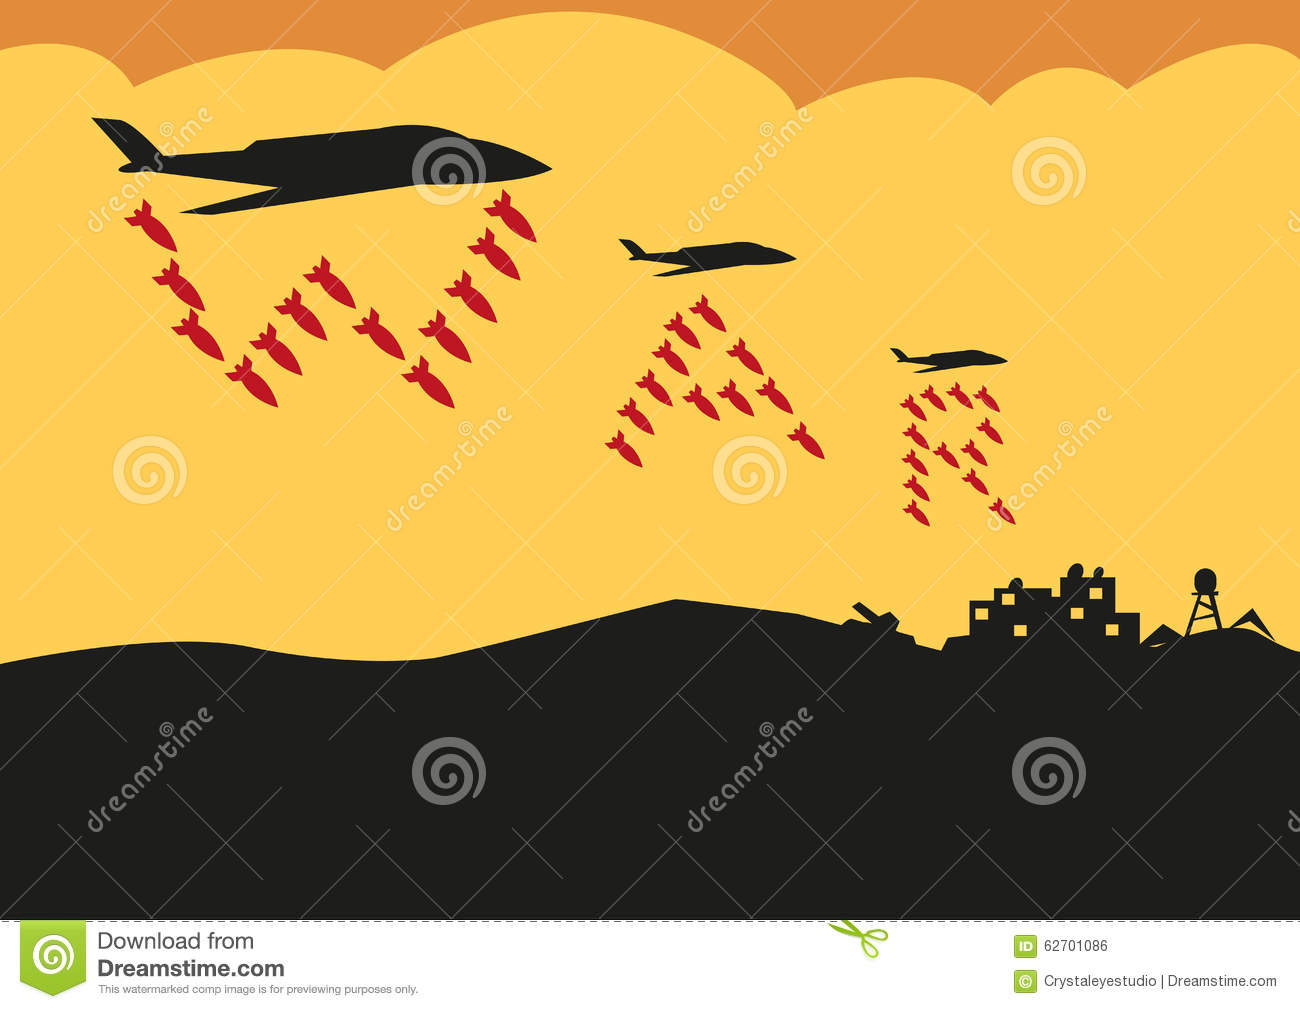 Stealth Bomber Vector Illustration Stock Photography.